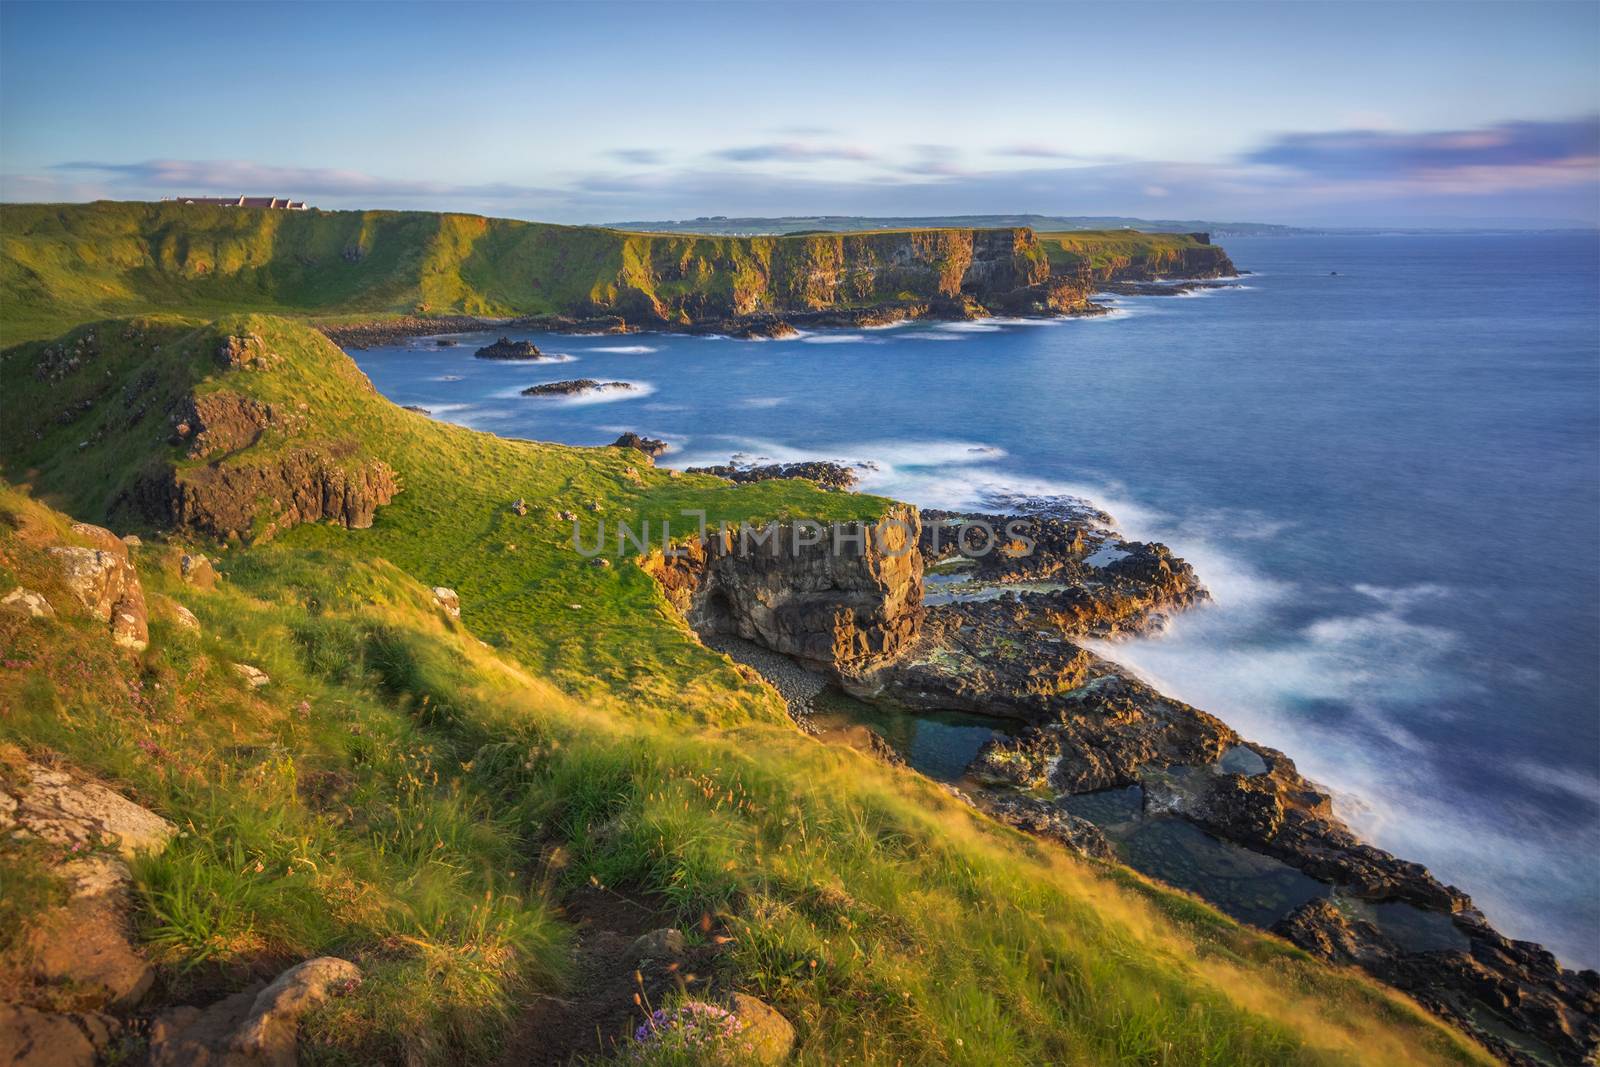 view on Portnaboe bay and North Antrim Cliff from Great Stookan along the Giant's Causeway, County Antrim, Northern Ireland, UK